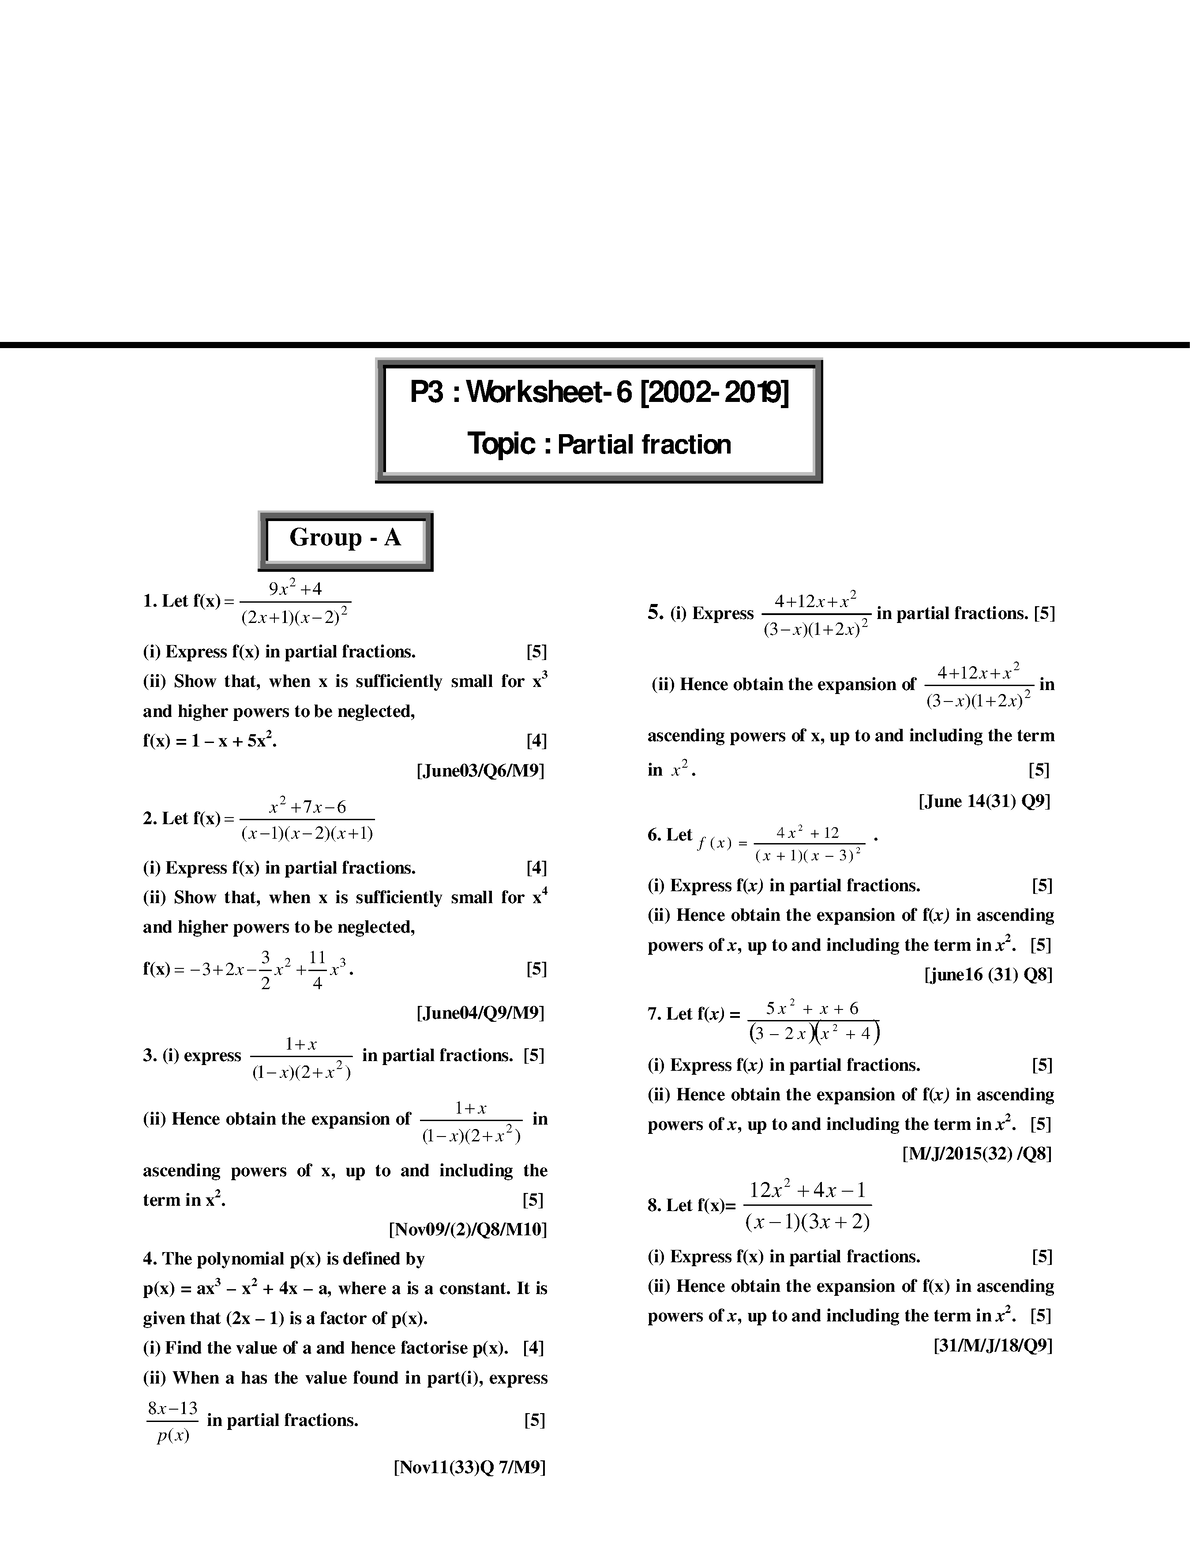 worksheet-6-partial-fraction-samim-s-tutorial-ensures-quality-education-an-o-a-level